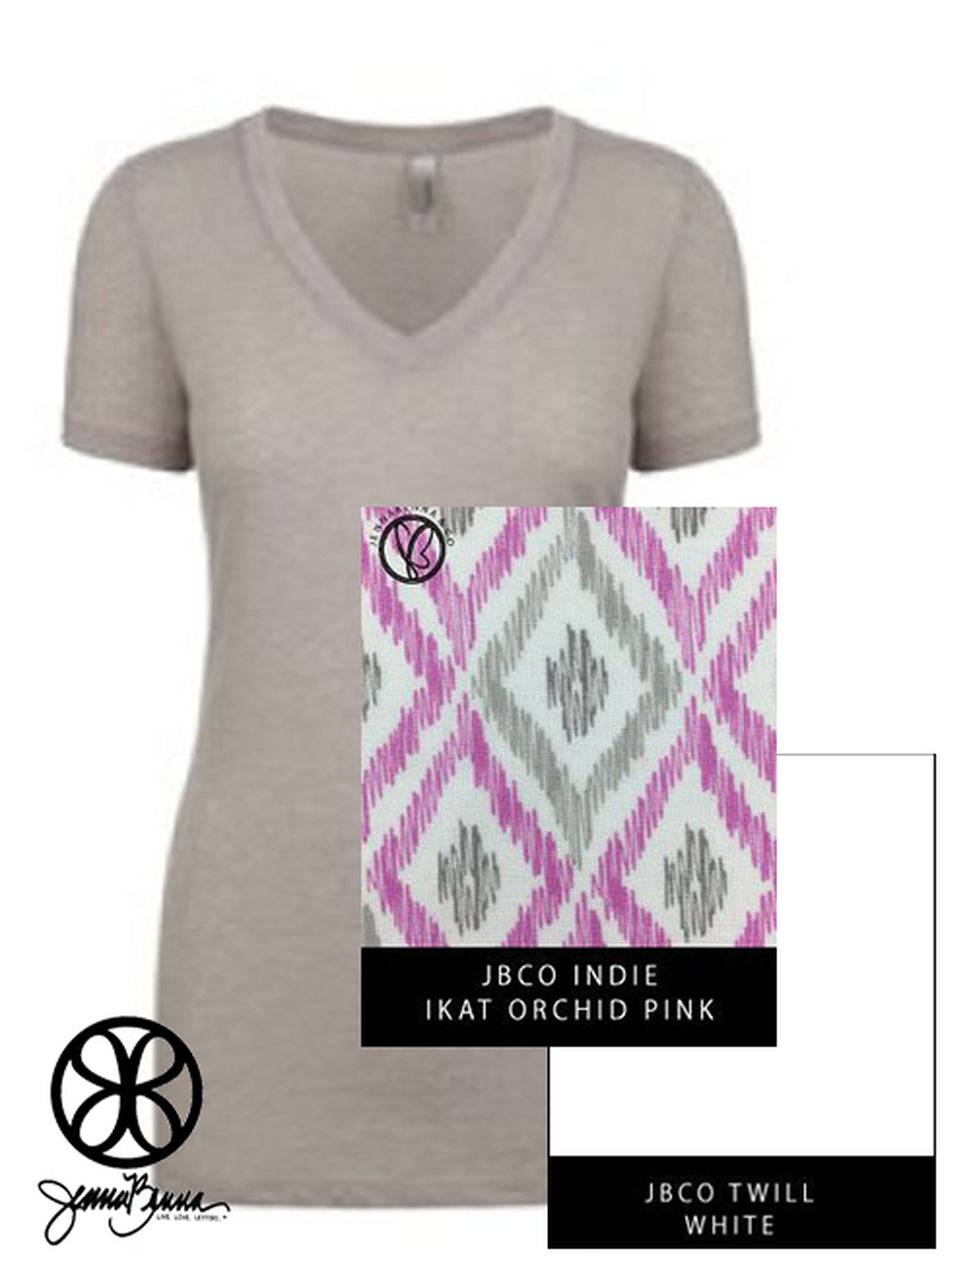 Sorority Apparel - Silver Next Level Ladies Fit Poly Cotton V-Neck Tee  + Ikat Orchid Pink Indie